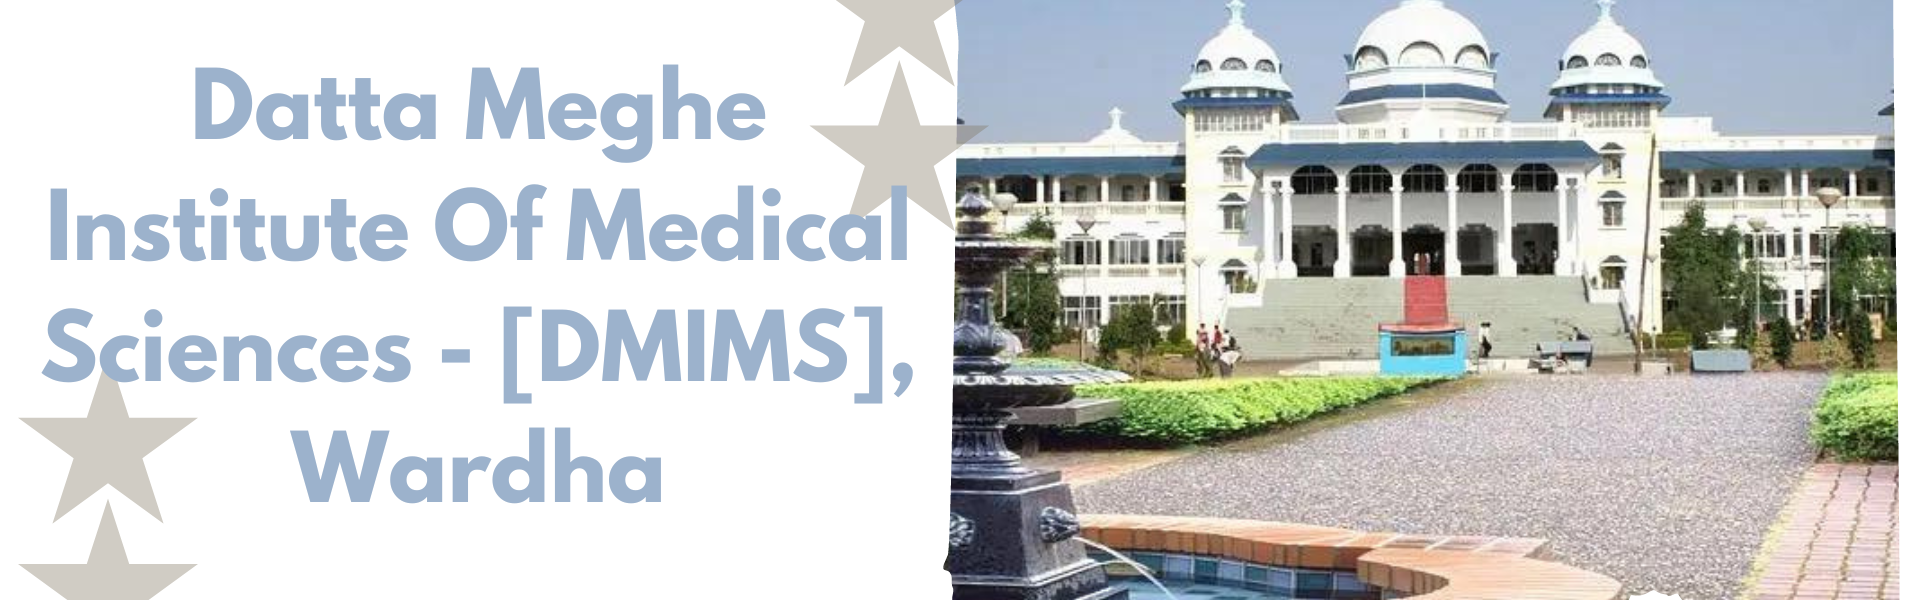 Datta Meghe Institute Of Medical Sciences - [DMIMS], Wardha